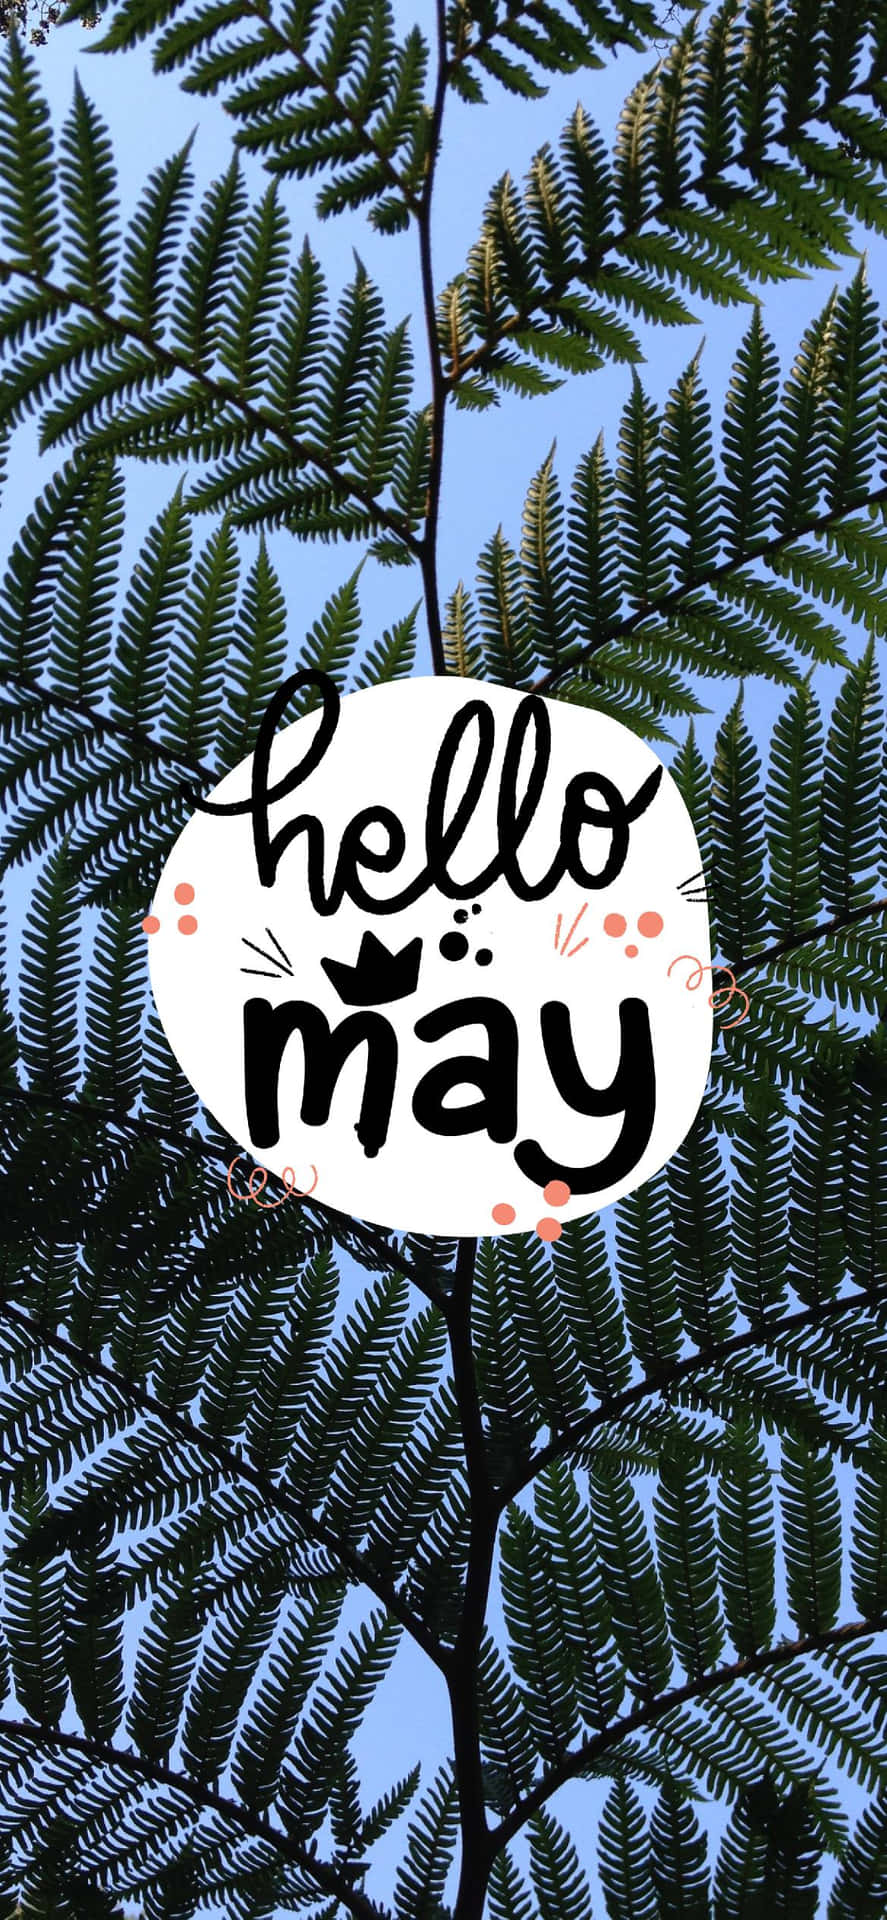 Welcoming May with Open Arms